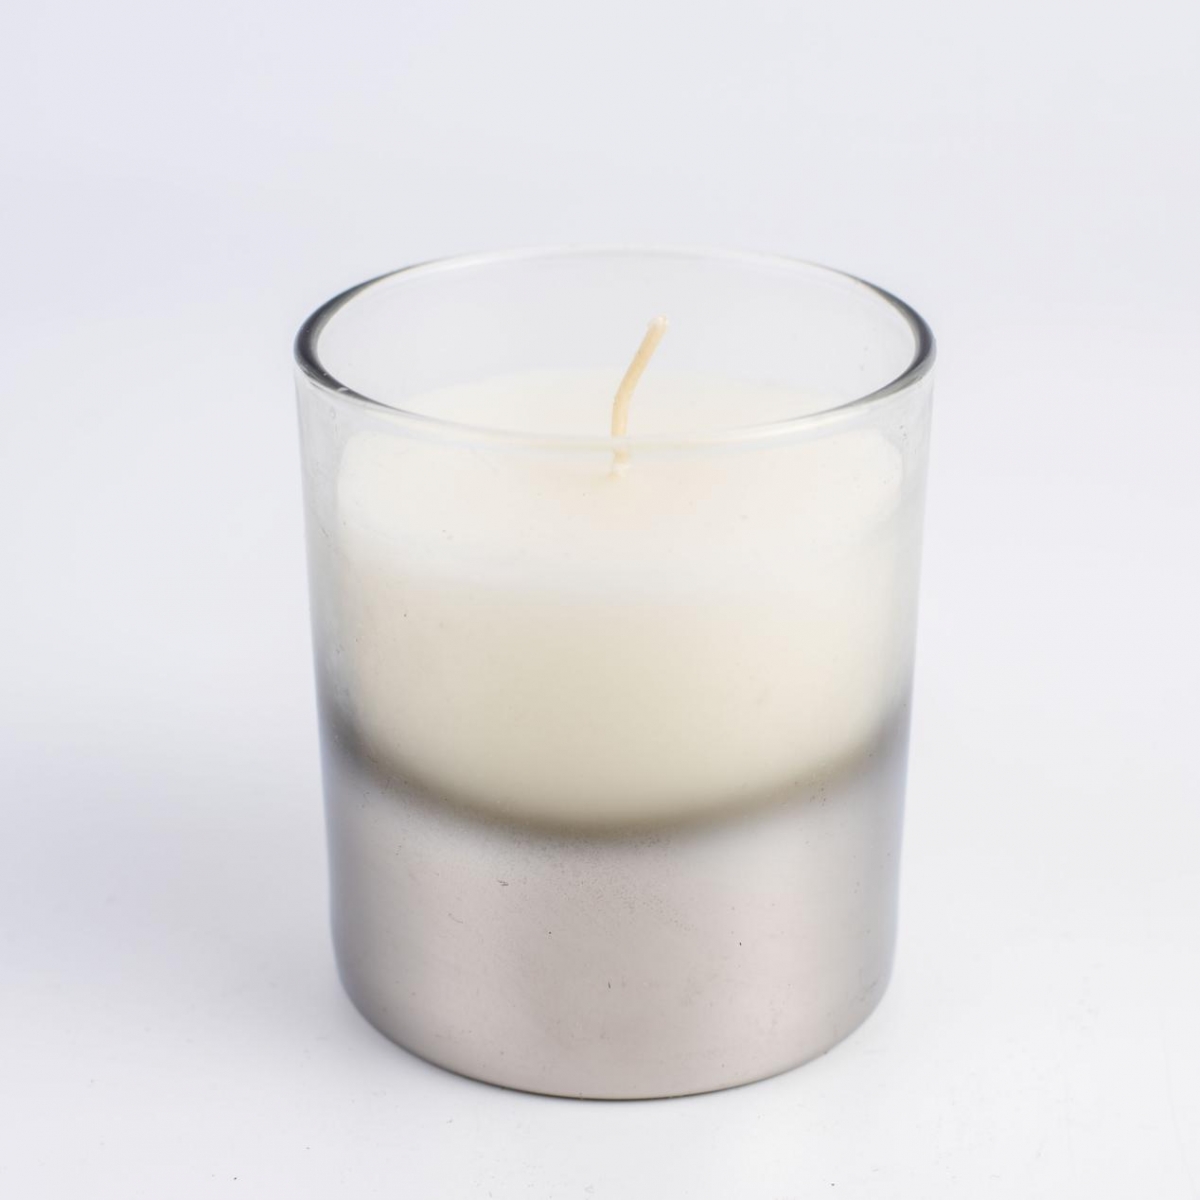 Scented Candles -Naturally Essential Oils ,Vanilla Candles ,Organic Soy Wax ,Gradient Silver Glass Jar ,China Factory ,Price-HOWCANDLE-Candles,Scented Candles,Aromatherapy Candles,Soy Candles,Vegan Candles,Jar Candles,Pillar Candles,Candle Gift Sets,Essential Oils,Reed Diffuser,Candle Holder,